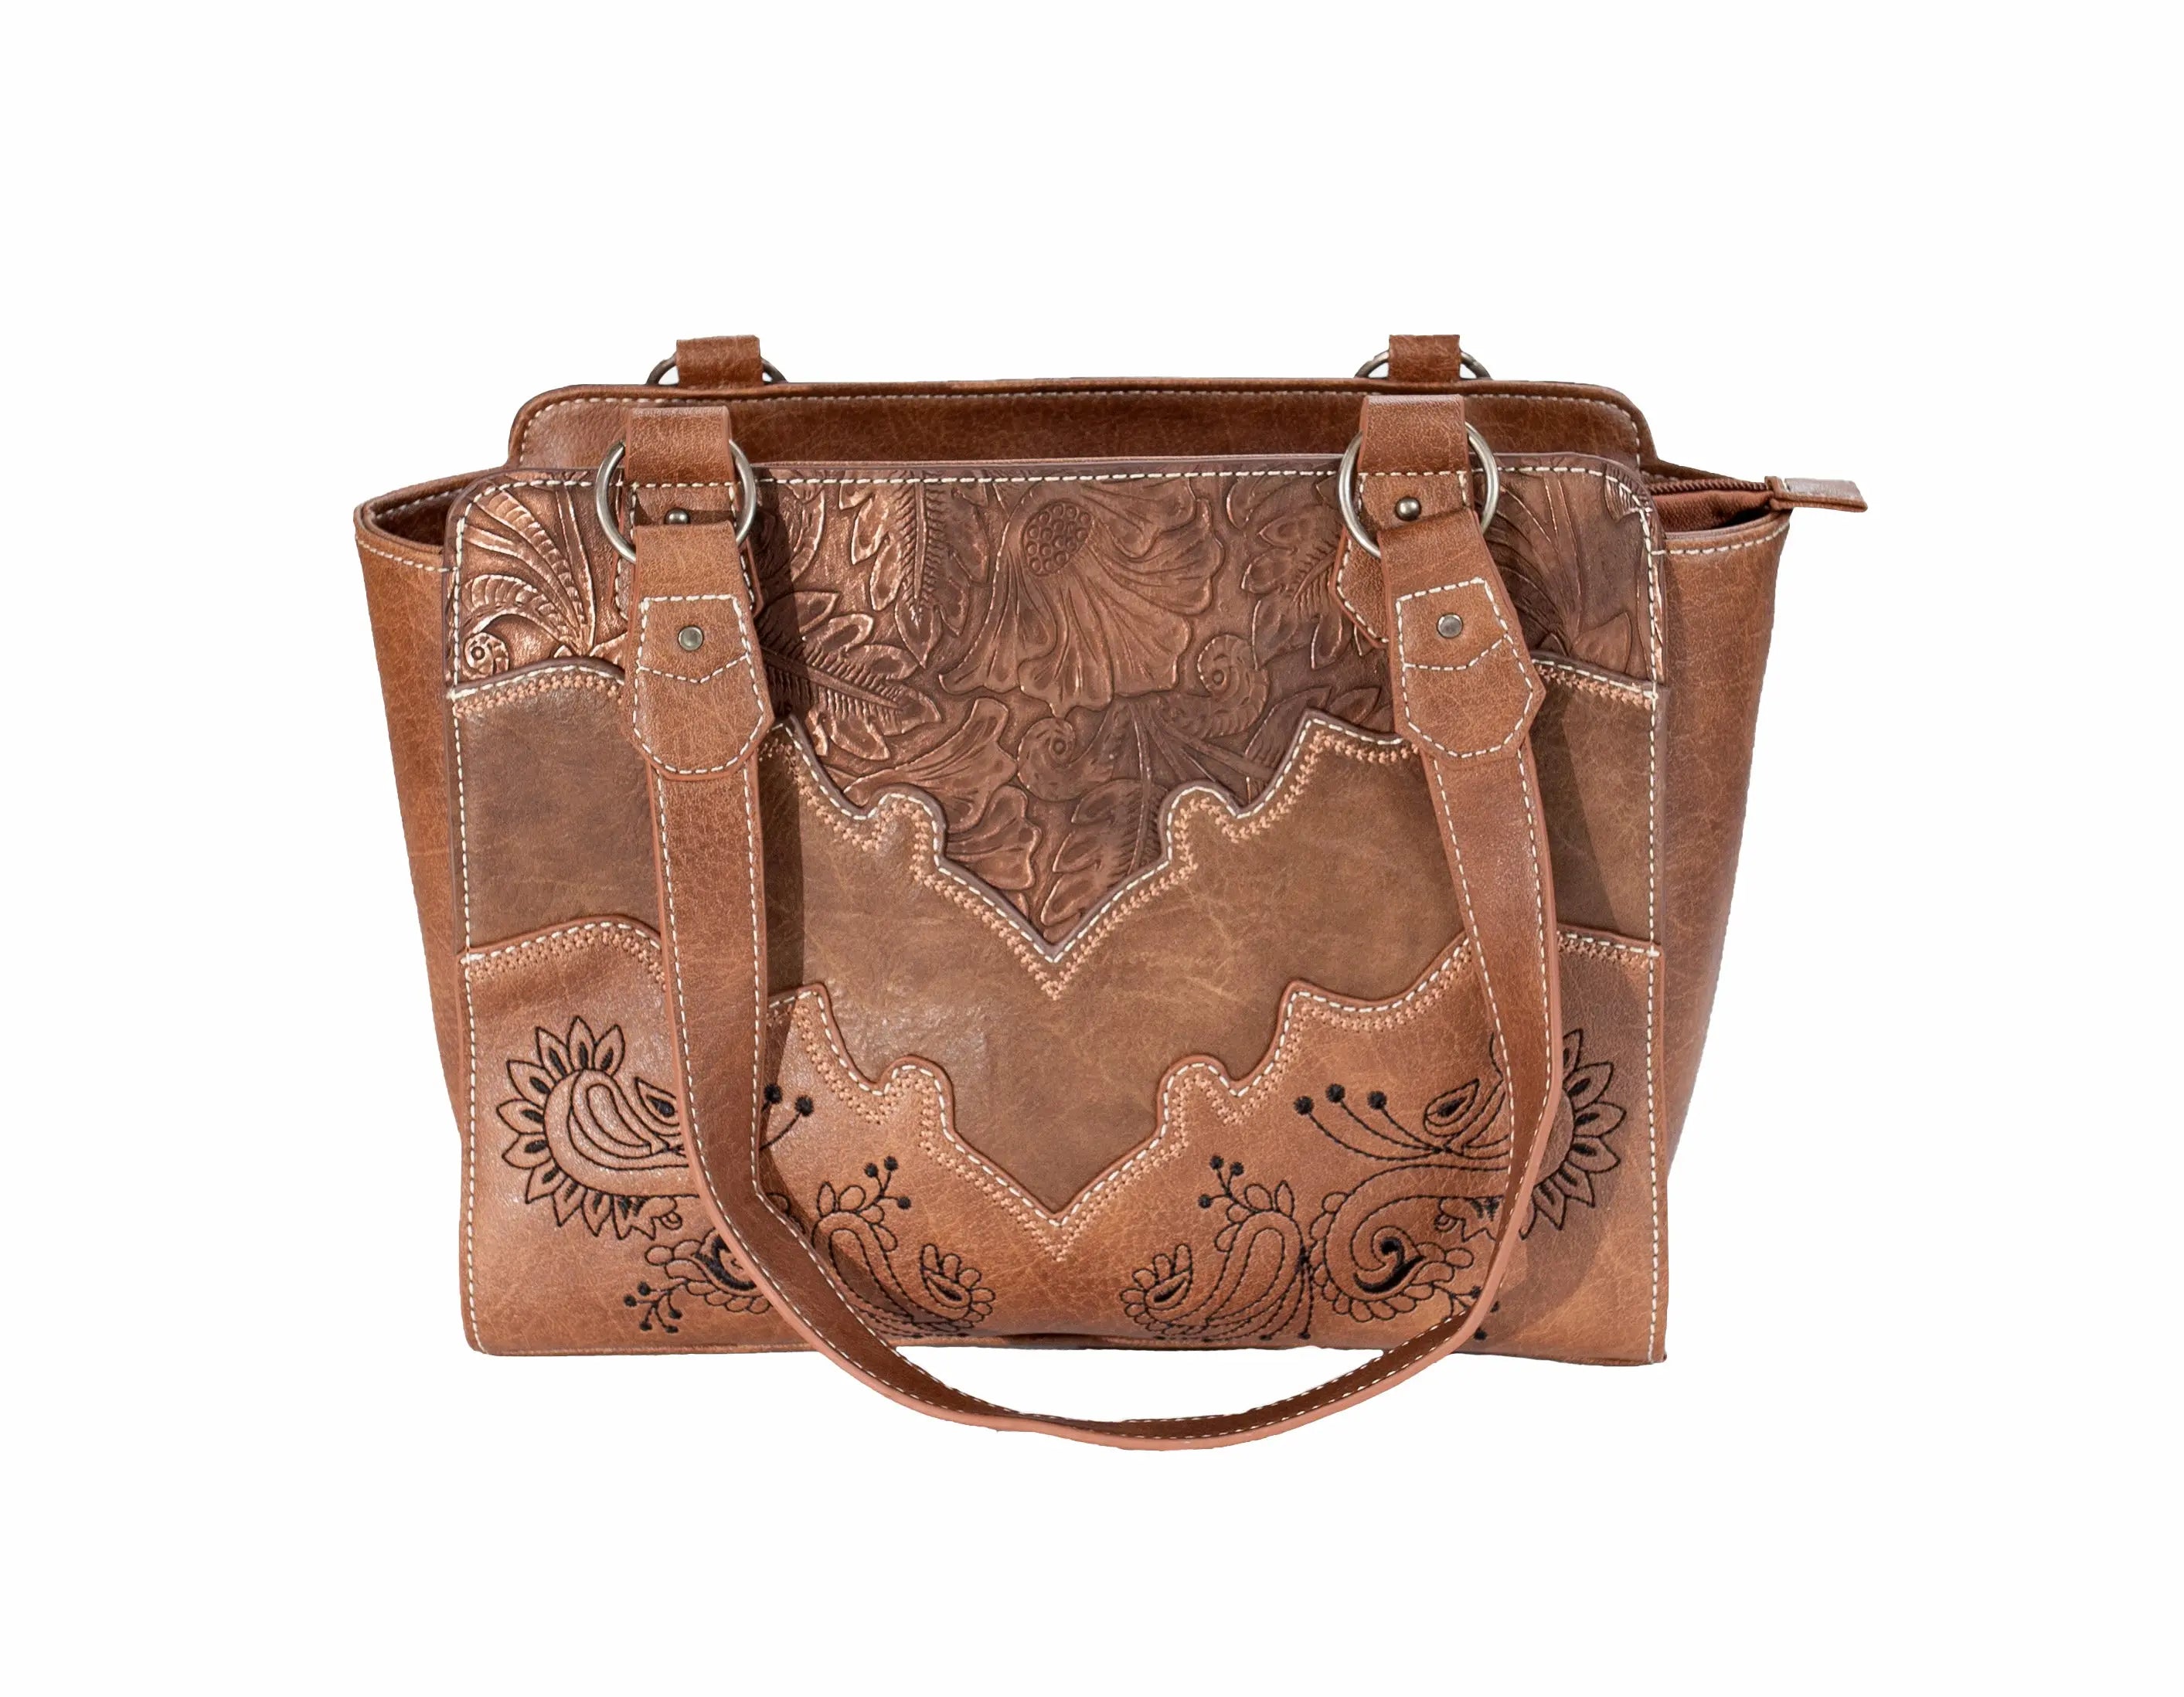 Brown Faux Leather Handbag - Western Style Outback Supply Co